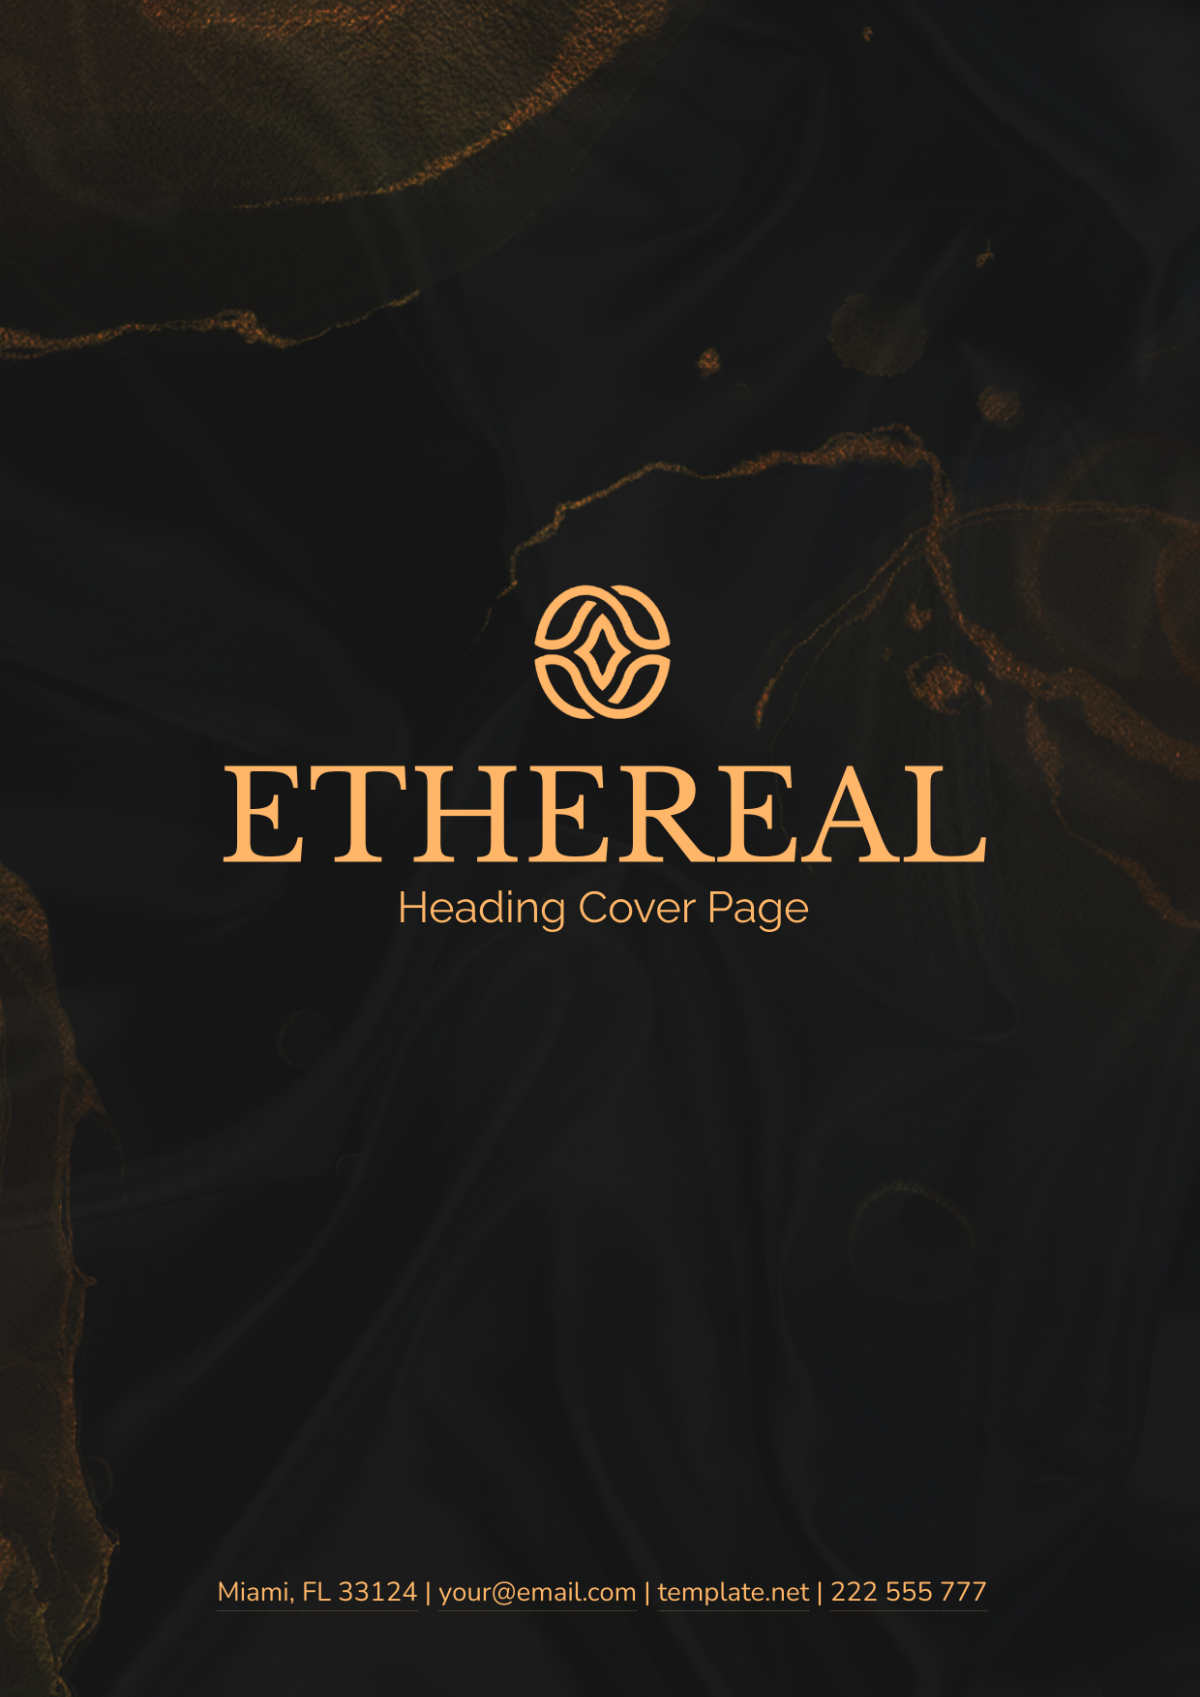 Ethereal Heading Cover Page Template